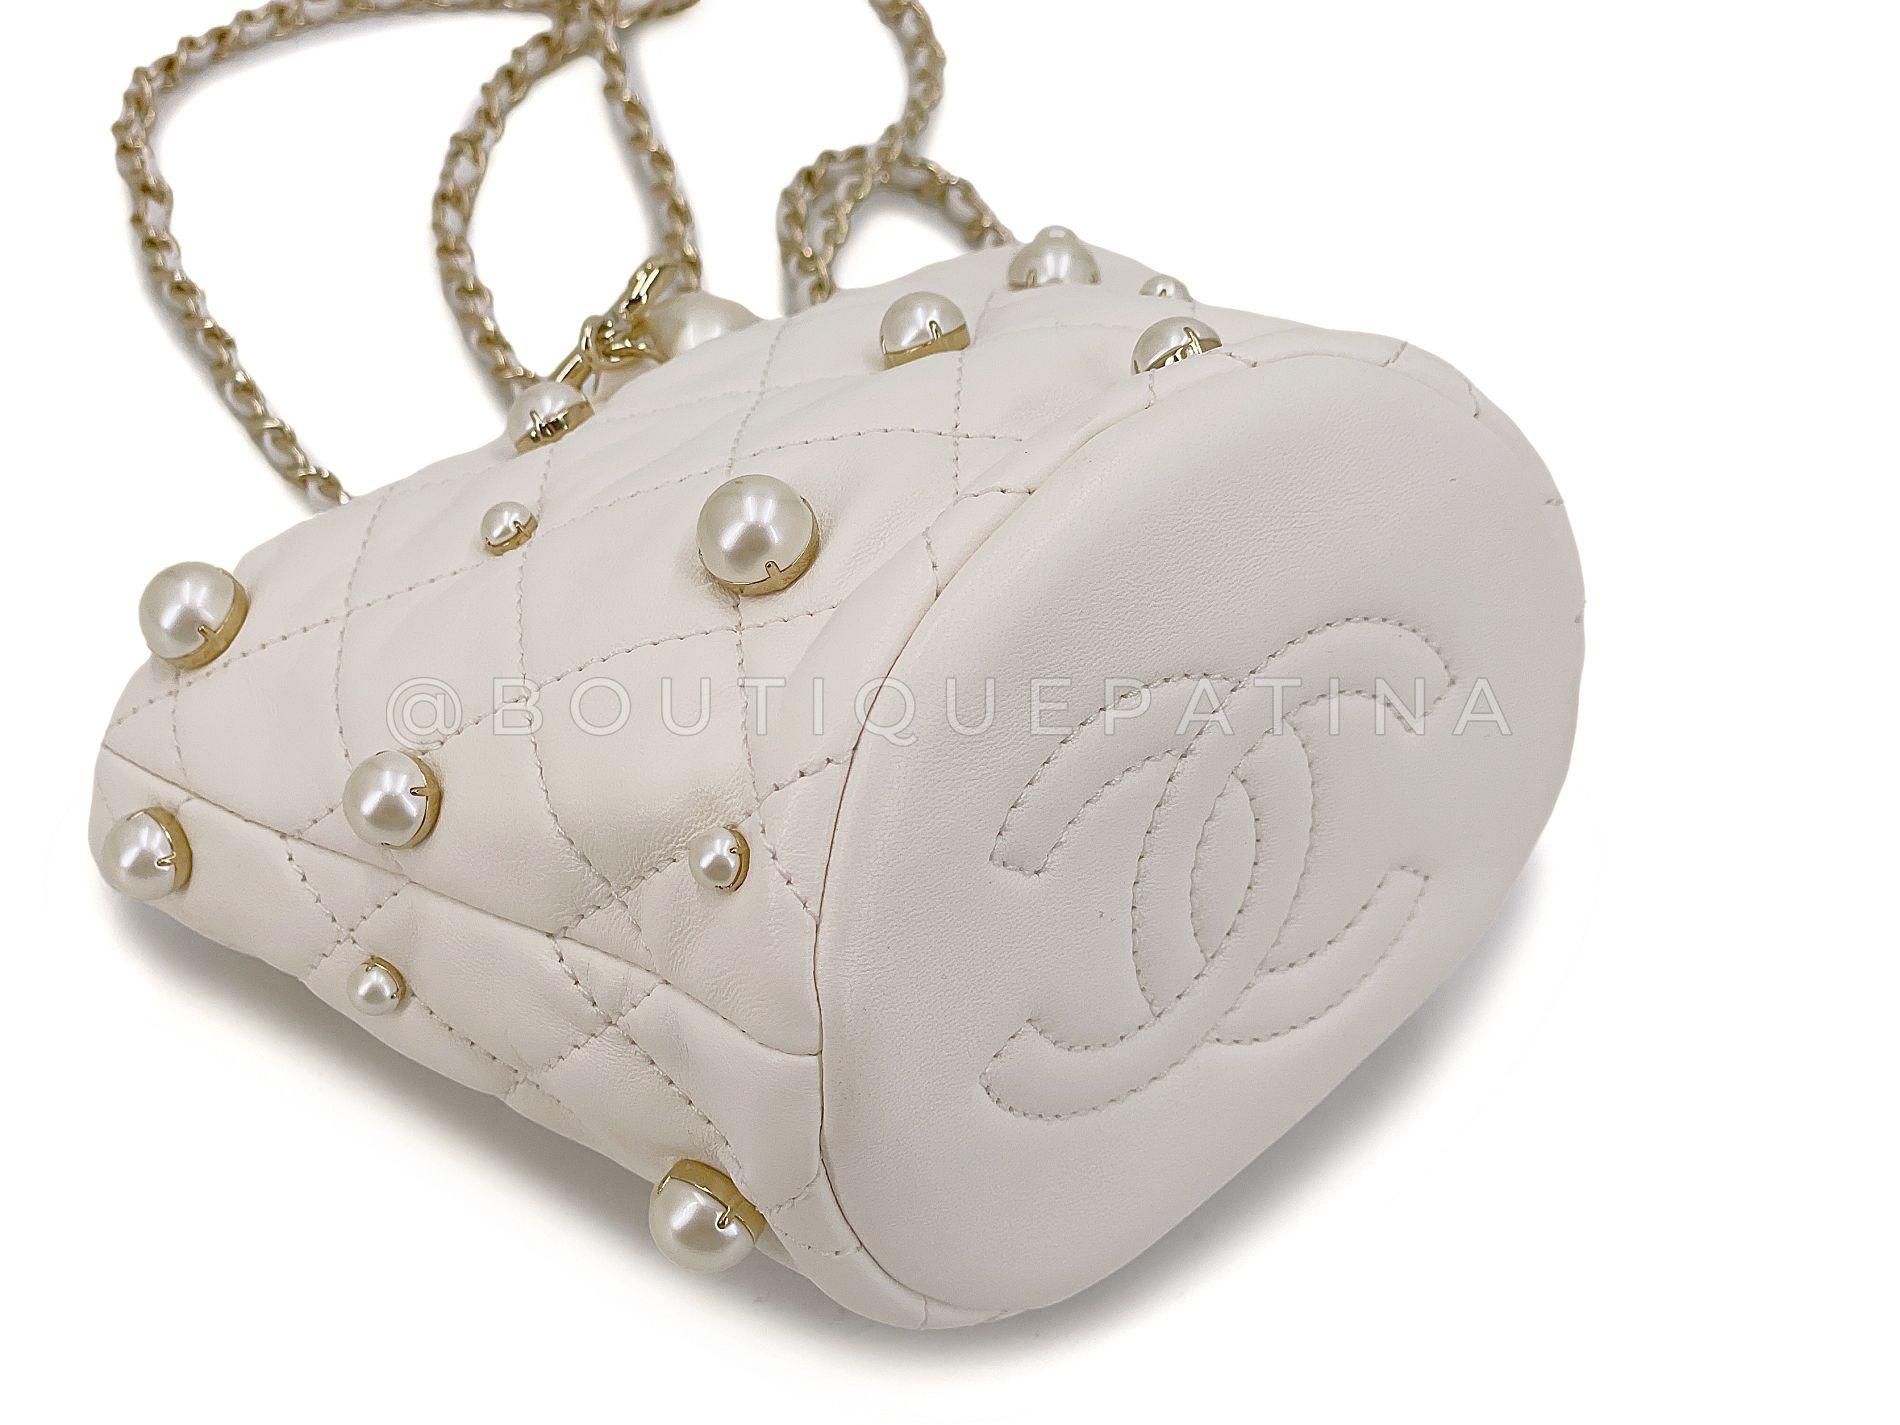 Chanel 21S White Cream About Pearls Bucket Bag Mini  67973 For Sale 3